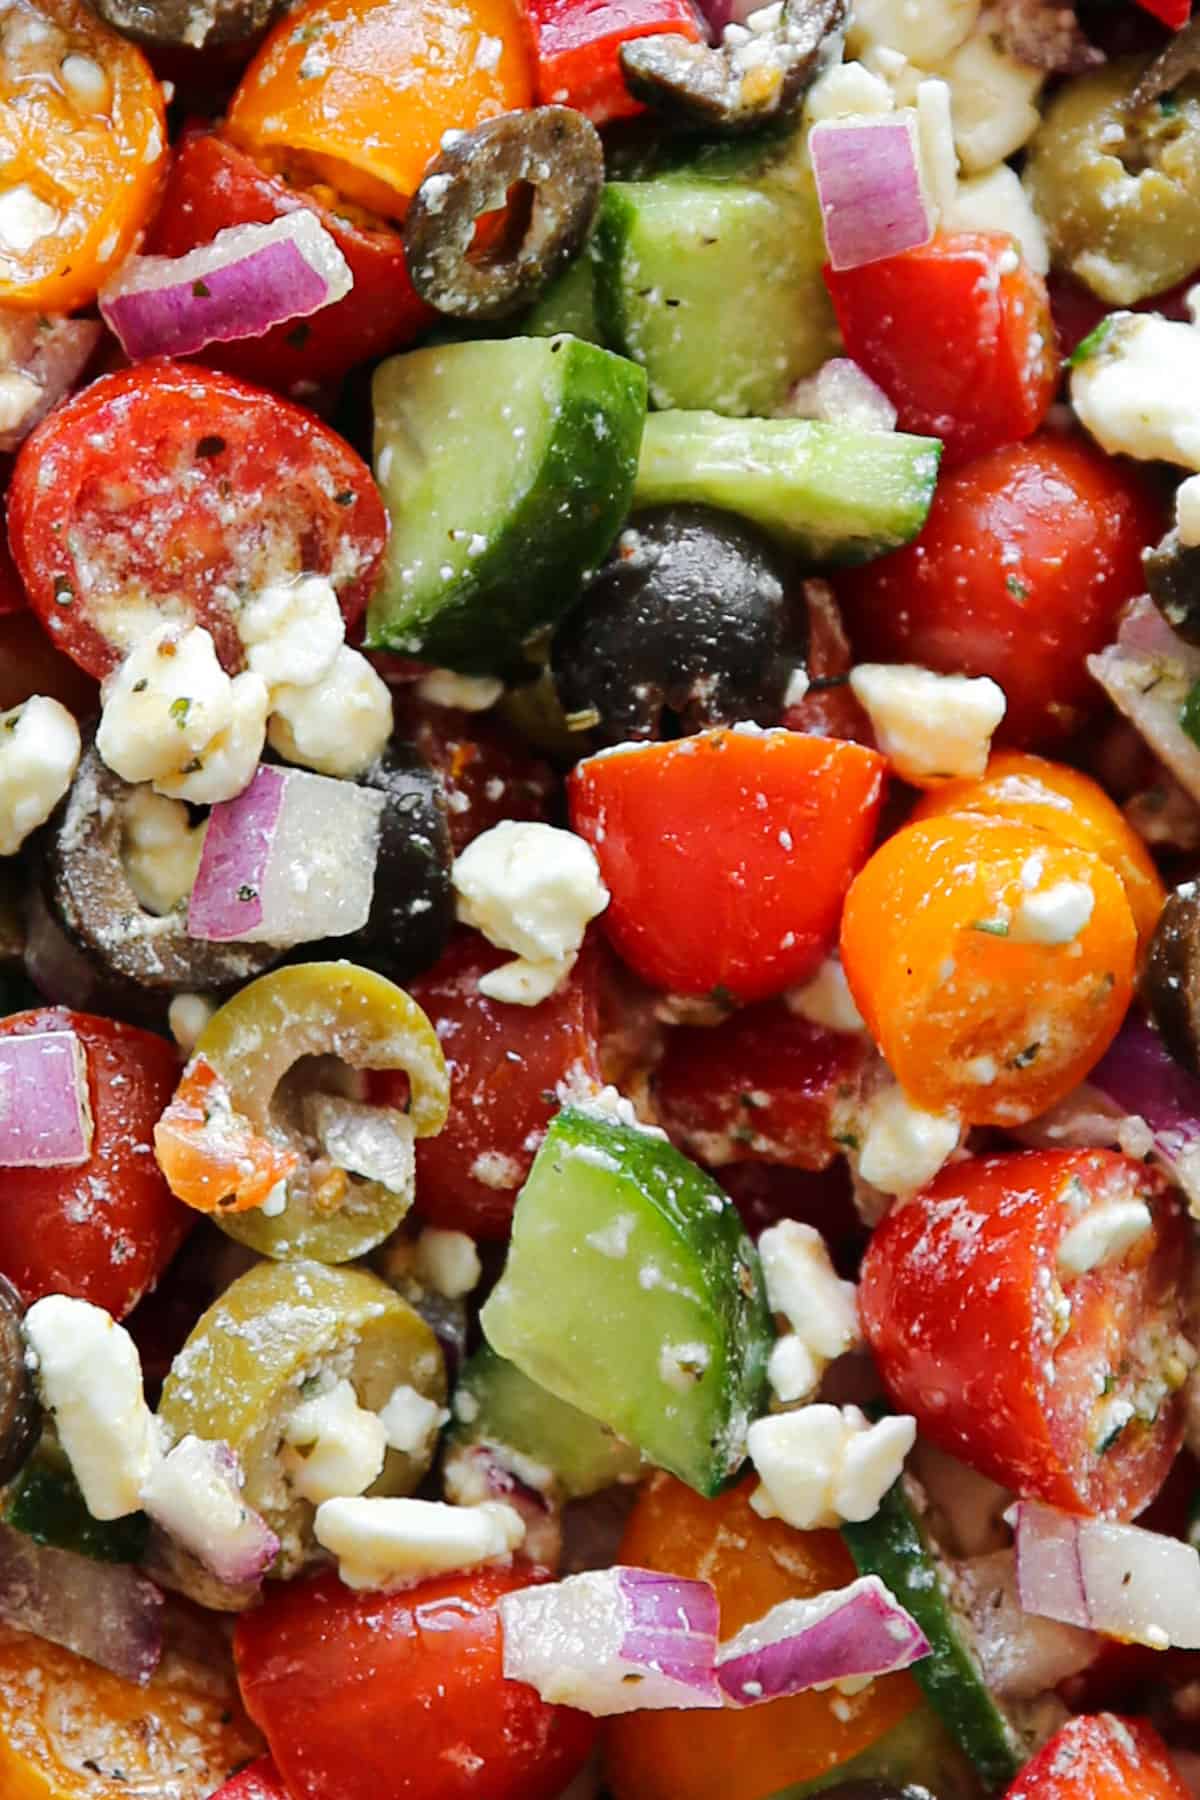 Greek salad with grape tomatoes, cucumber, bell pepper, olives, red onions, and feta cheese (close-up photo).